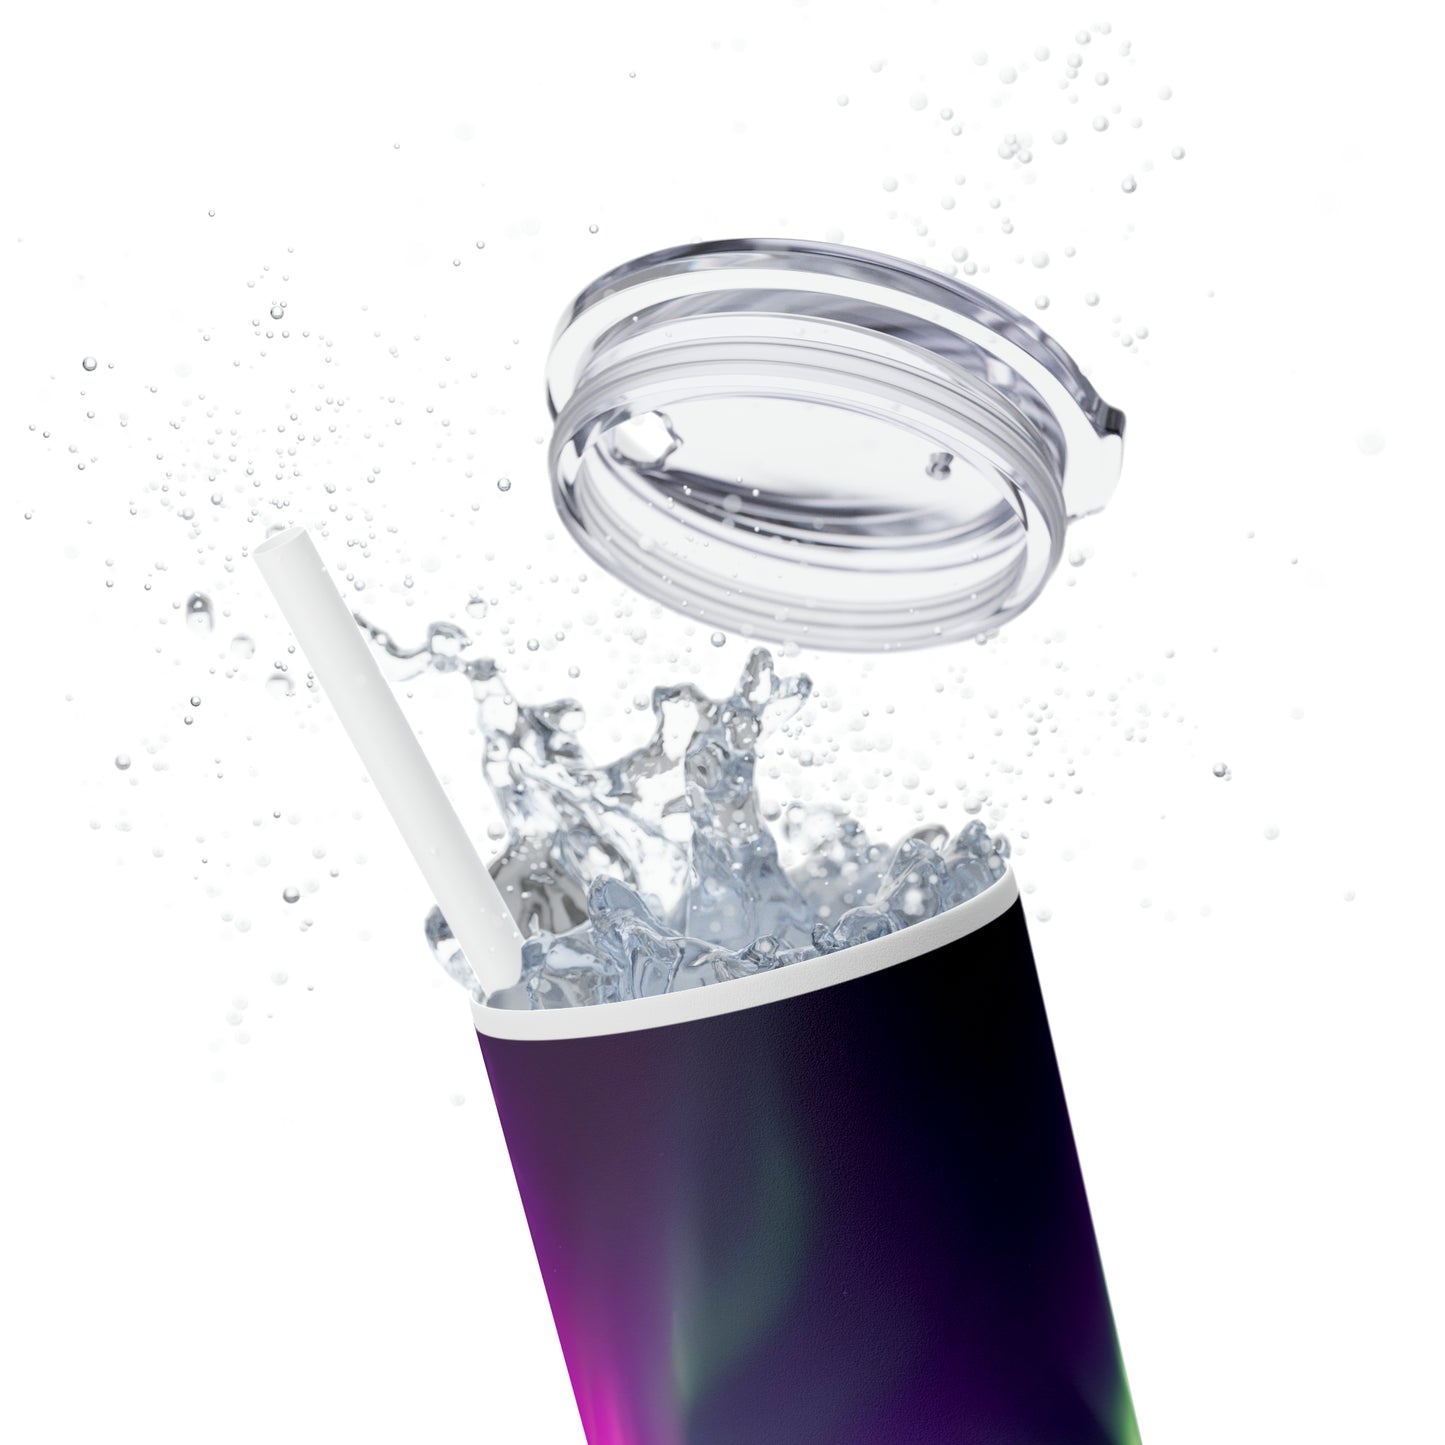 Unique Aurora Borealis Skinny Tumbler with Straw - Northern Light Travel Accessories - Stainless Steel Tumblers - Perfect Aurora Lovers Gift 10